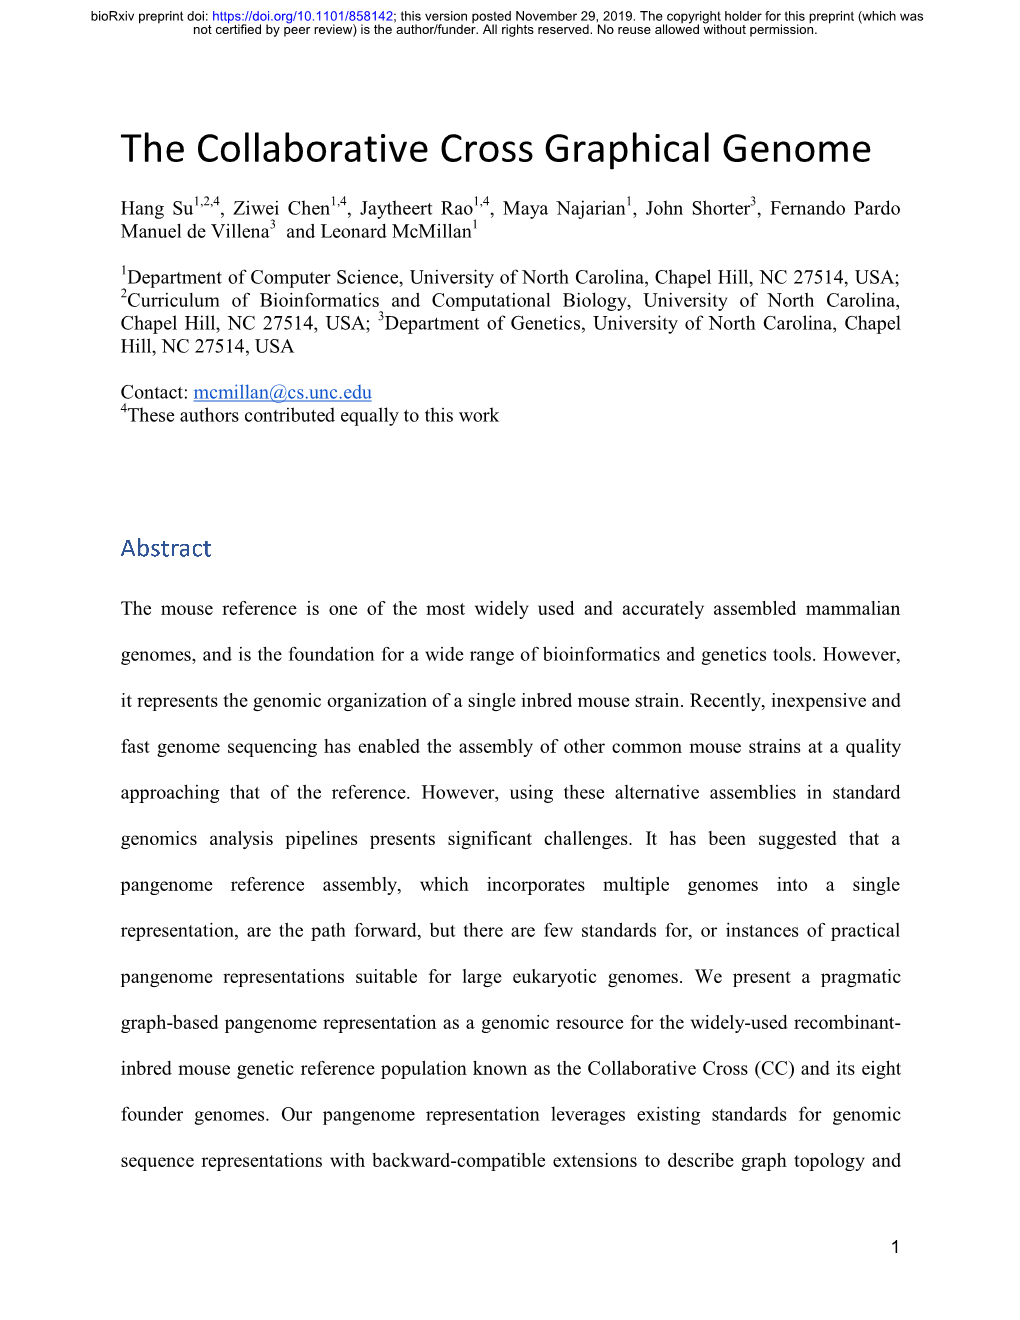 The Collaborative Cross Graphical Genome